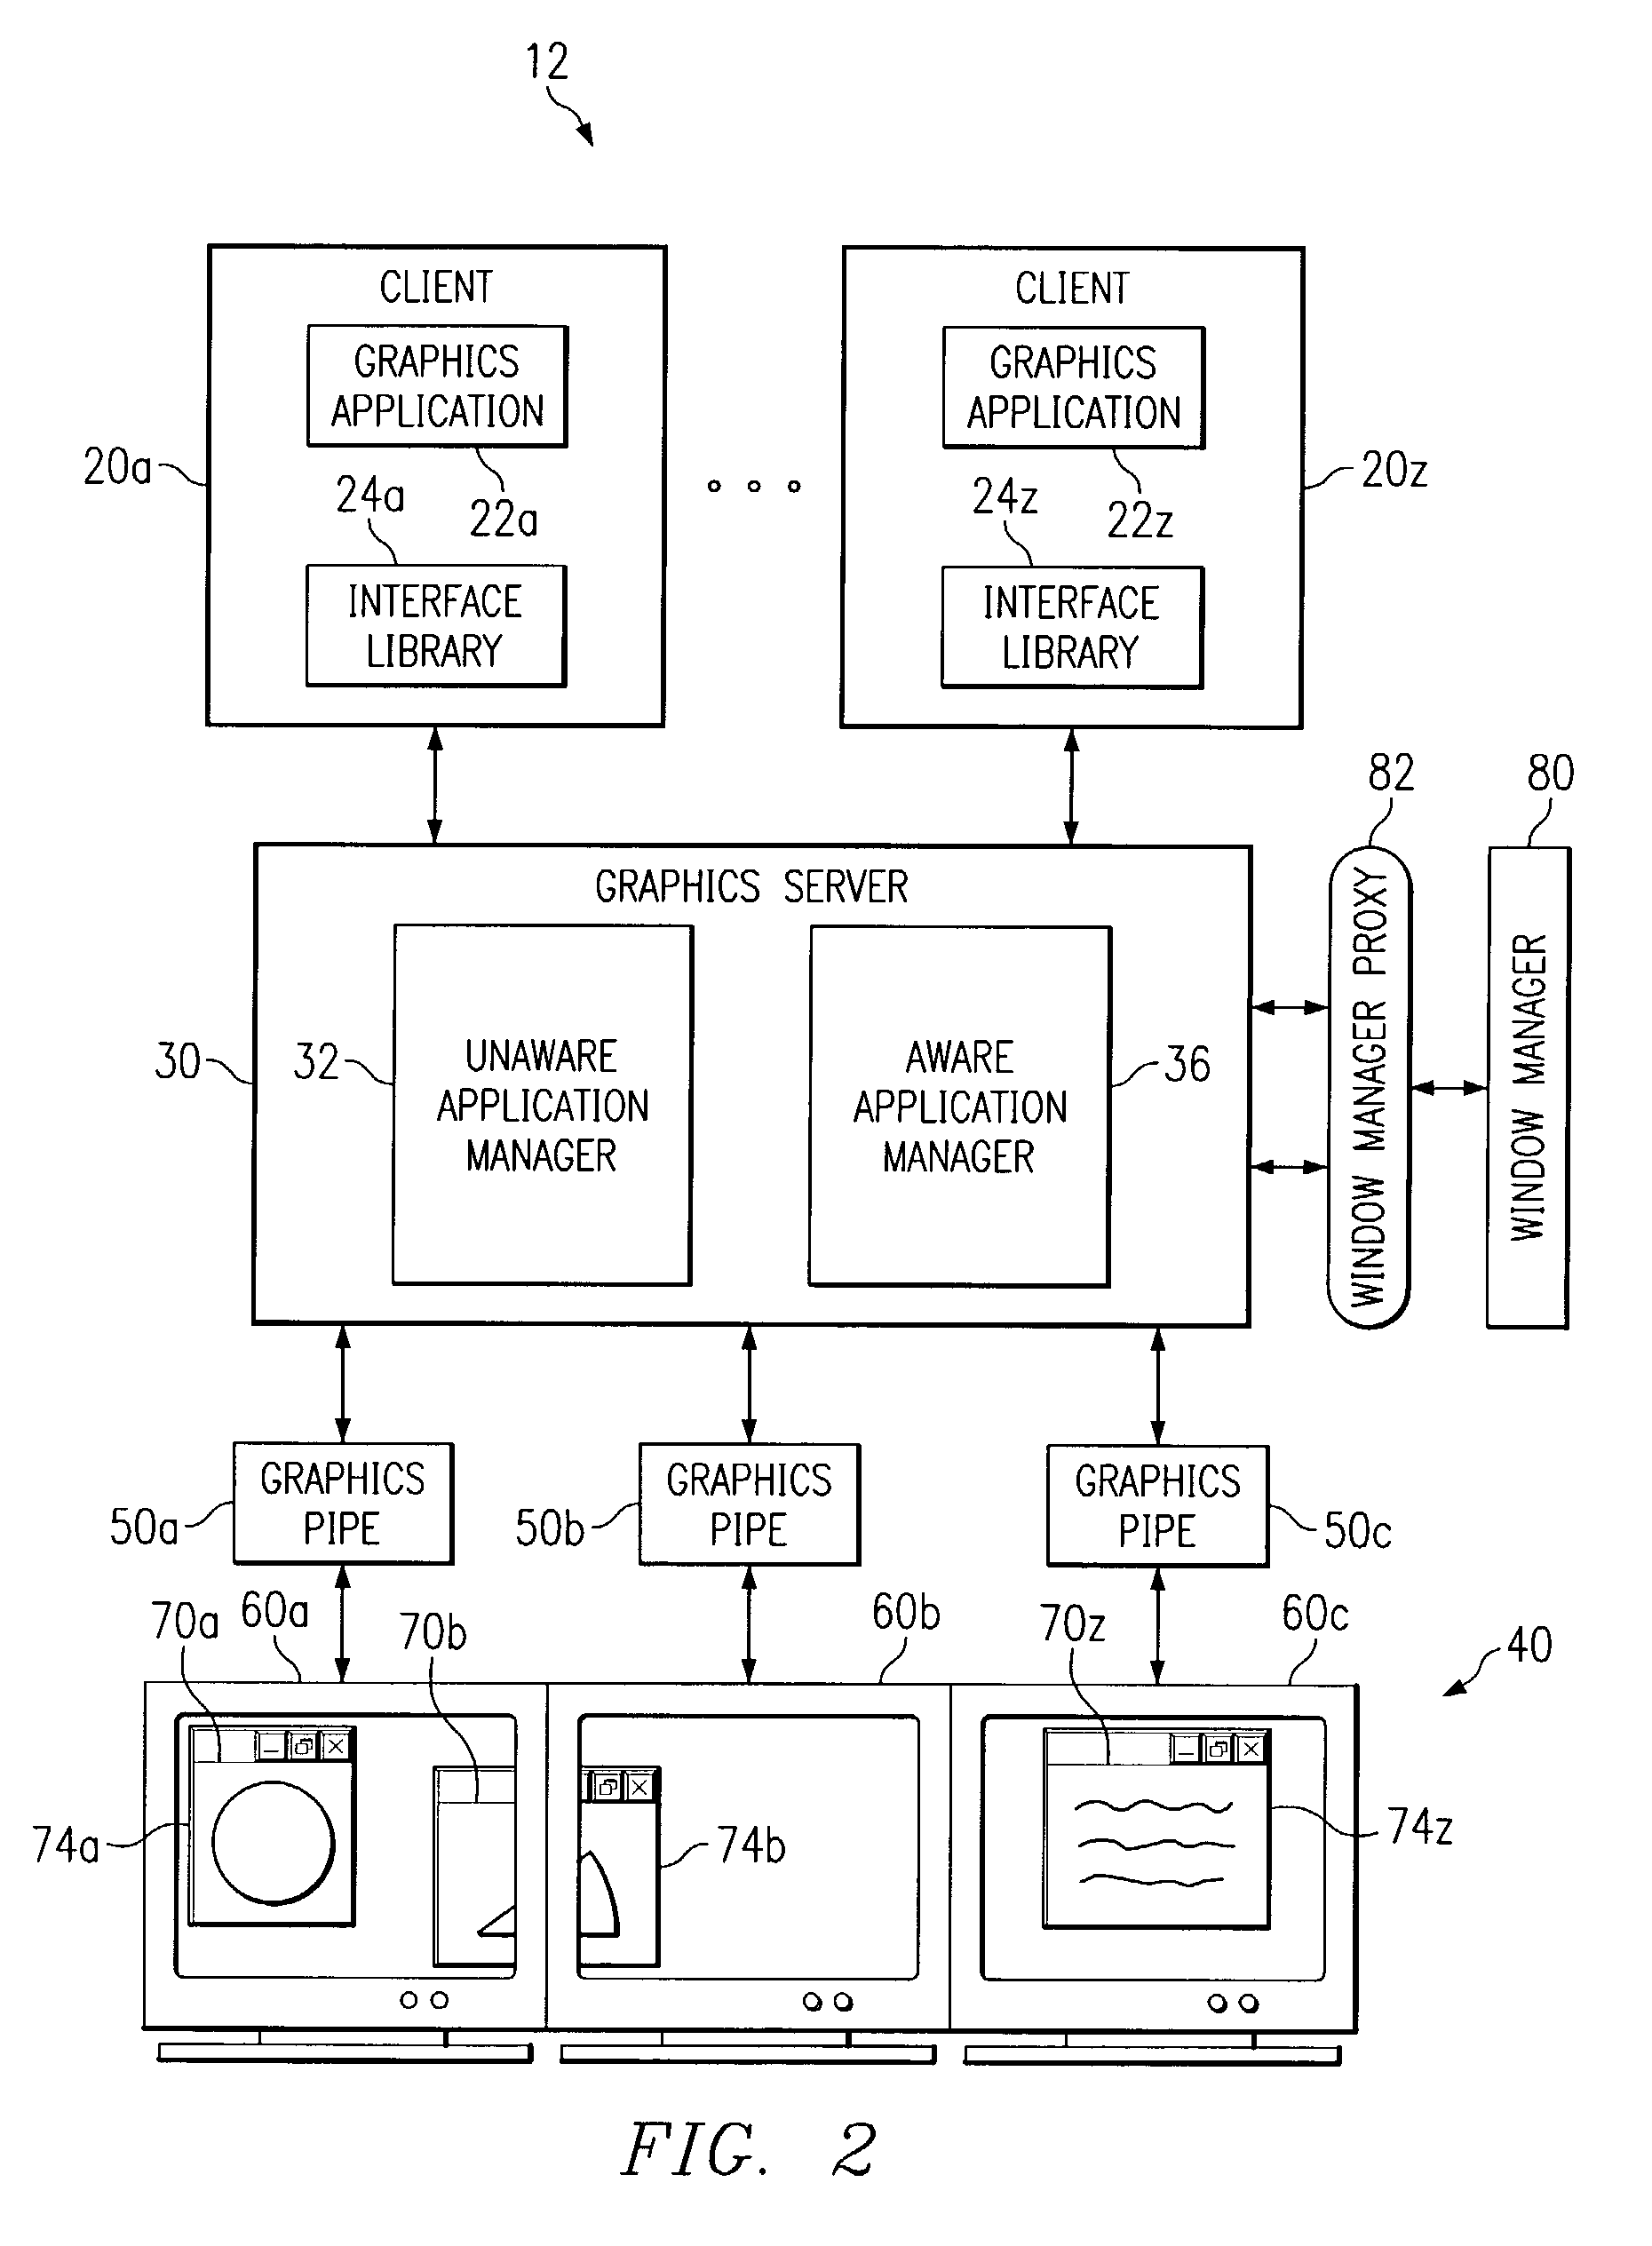 System and method for managing graphics applications